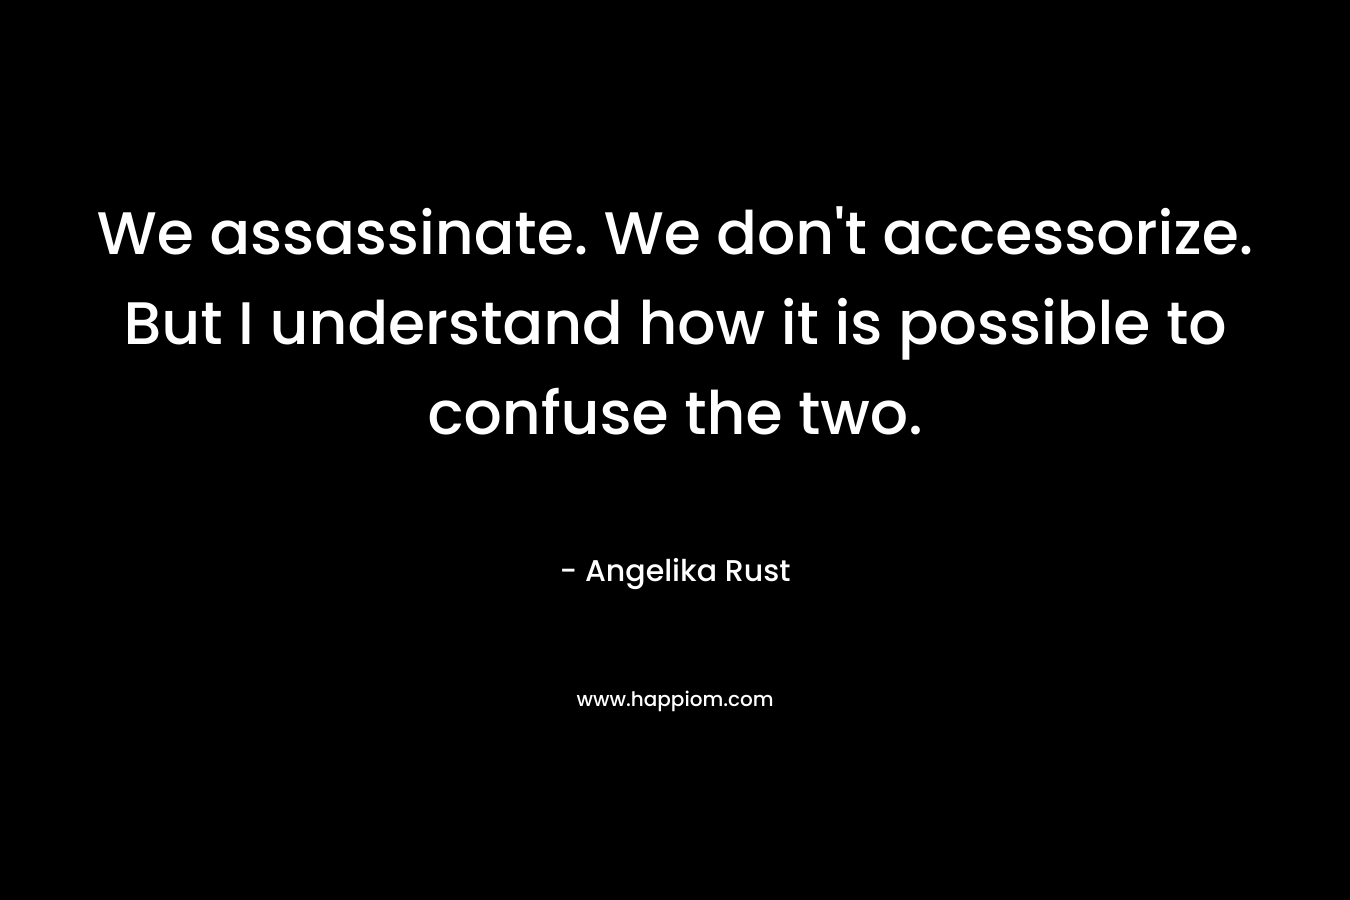 We assassinate. We don’t accessorize. But I understand how it is possible to confuse the two. – Angelika Rust